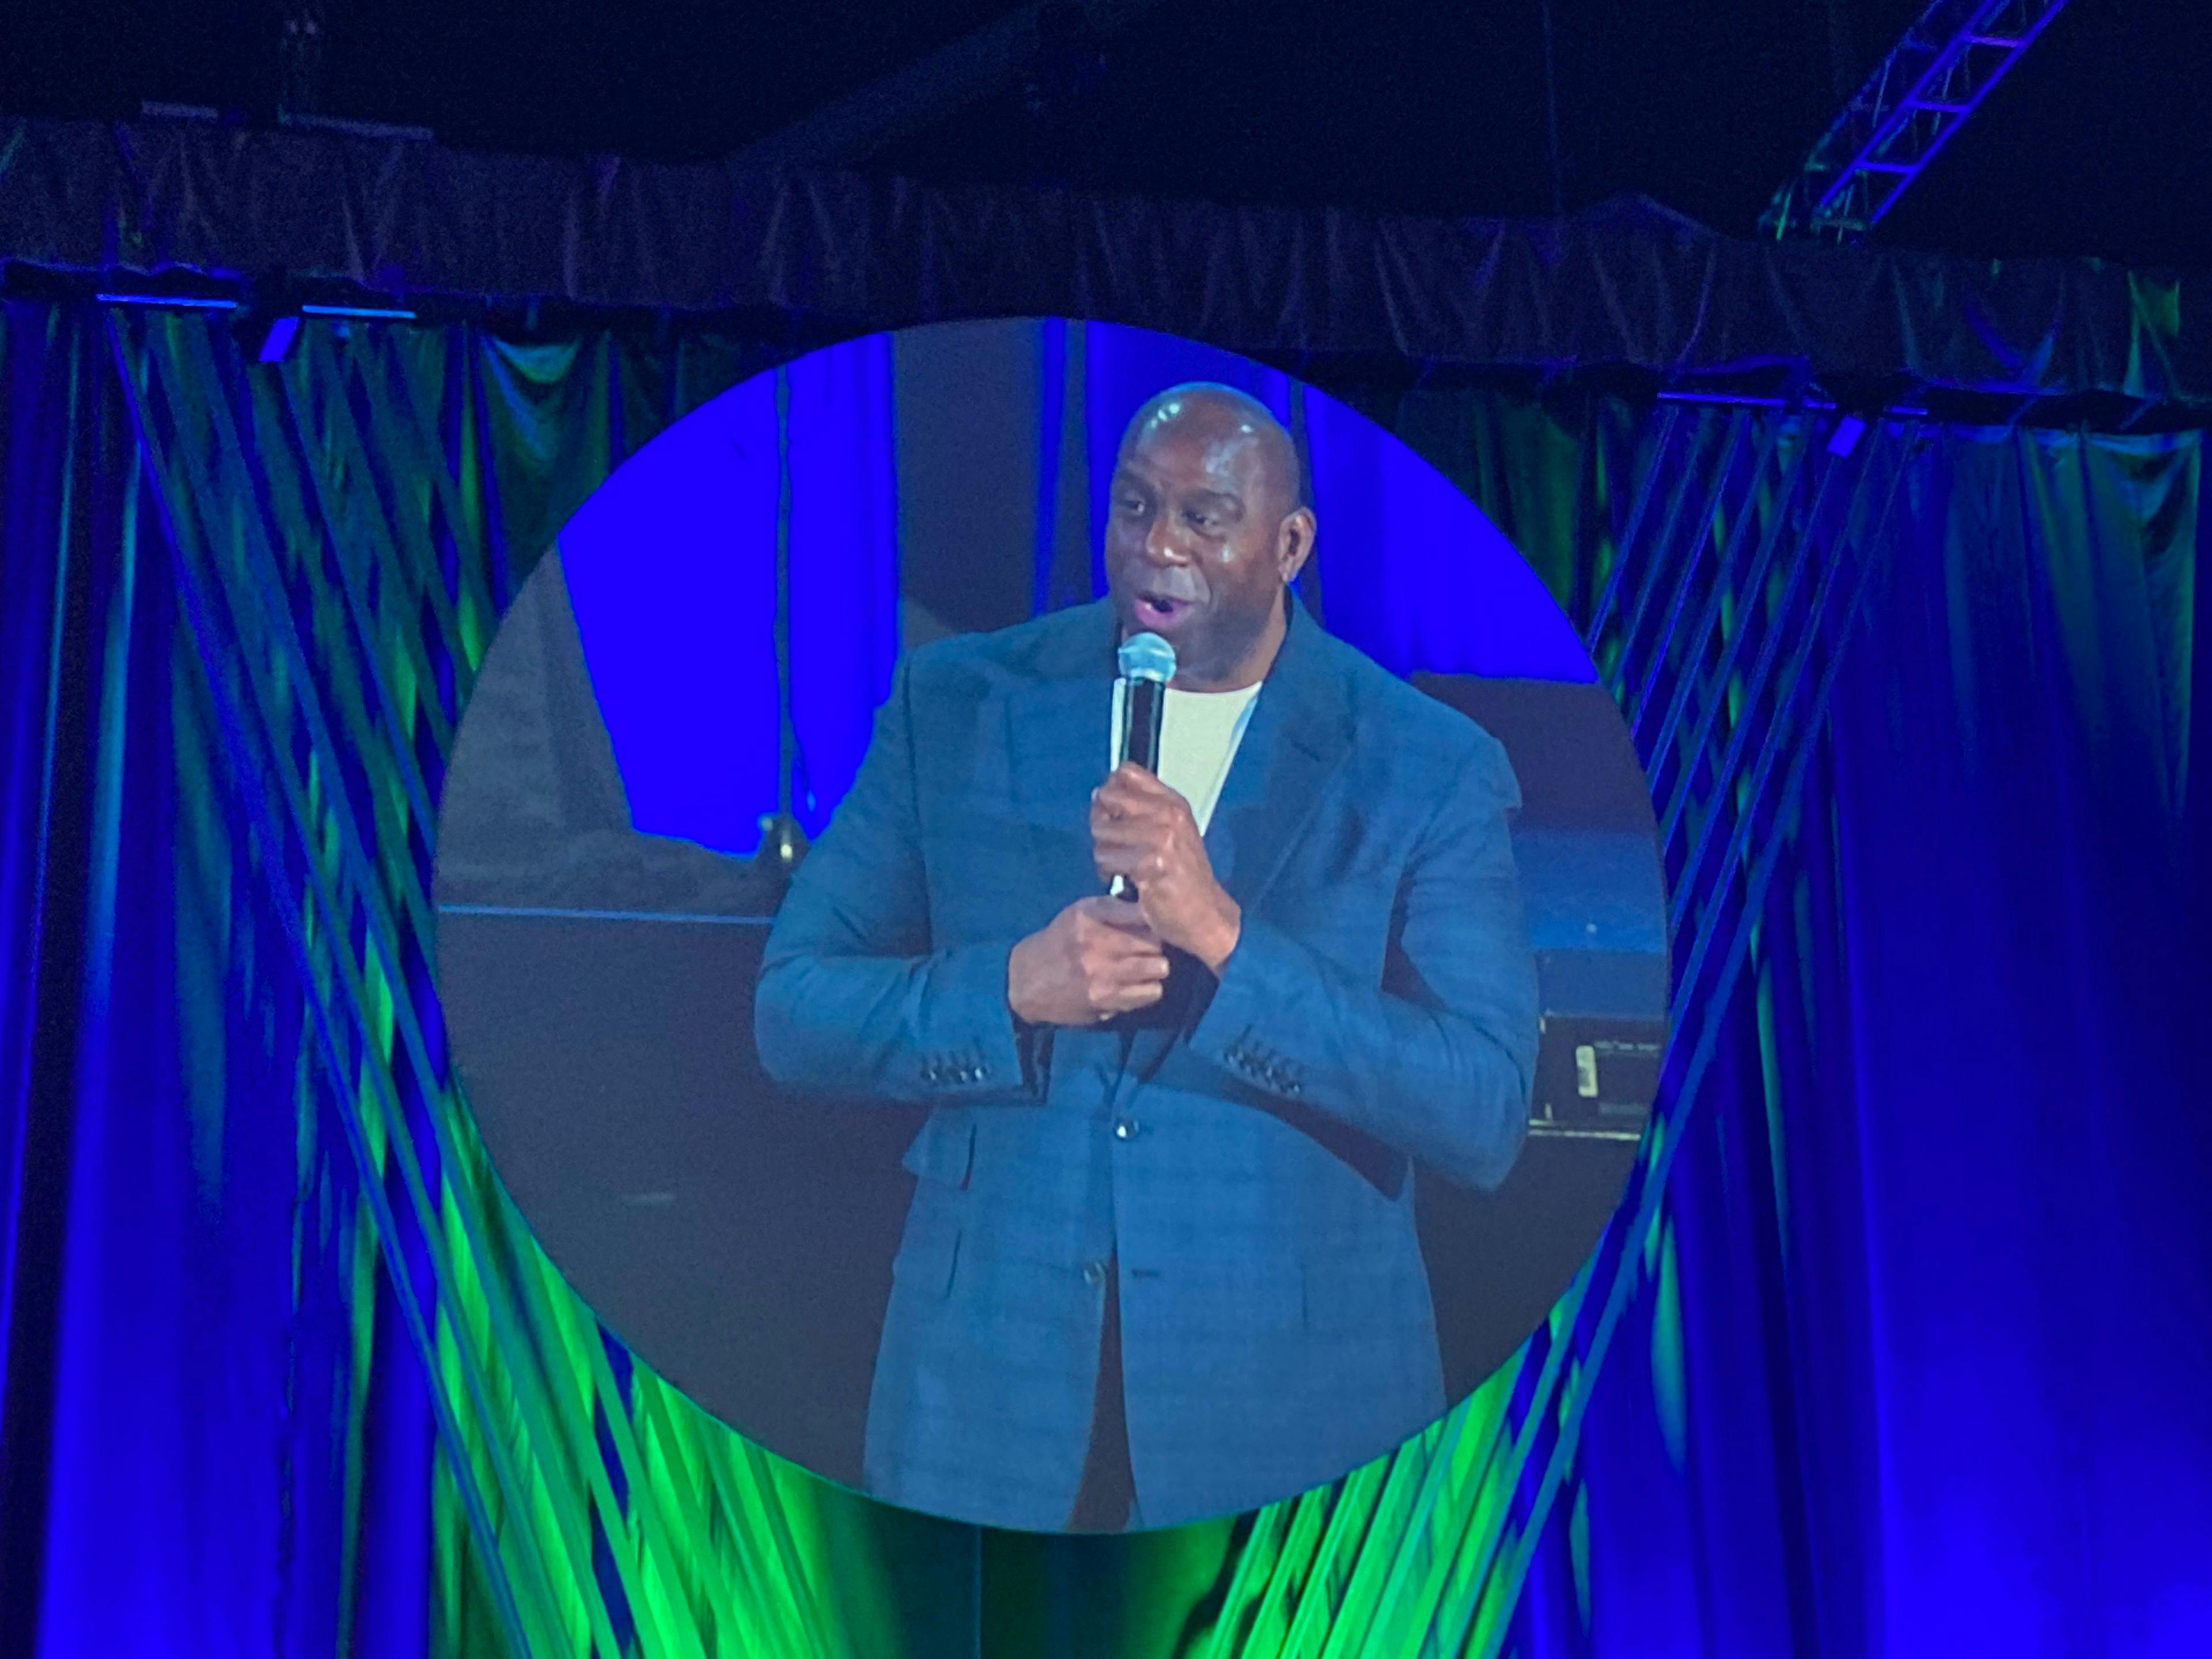 Magic Johnson addresses speaks at a veterinary conference